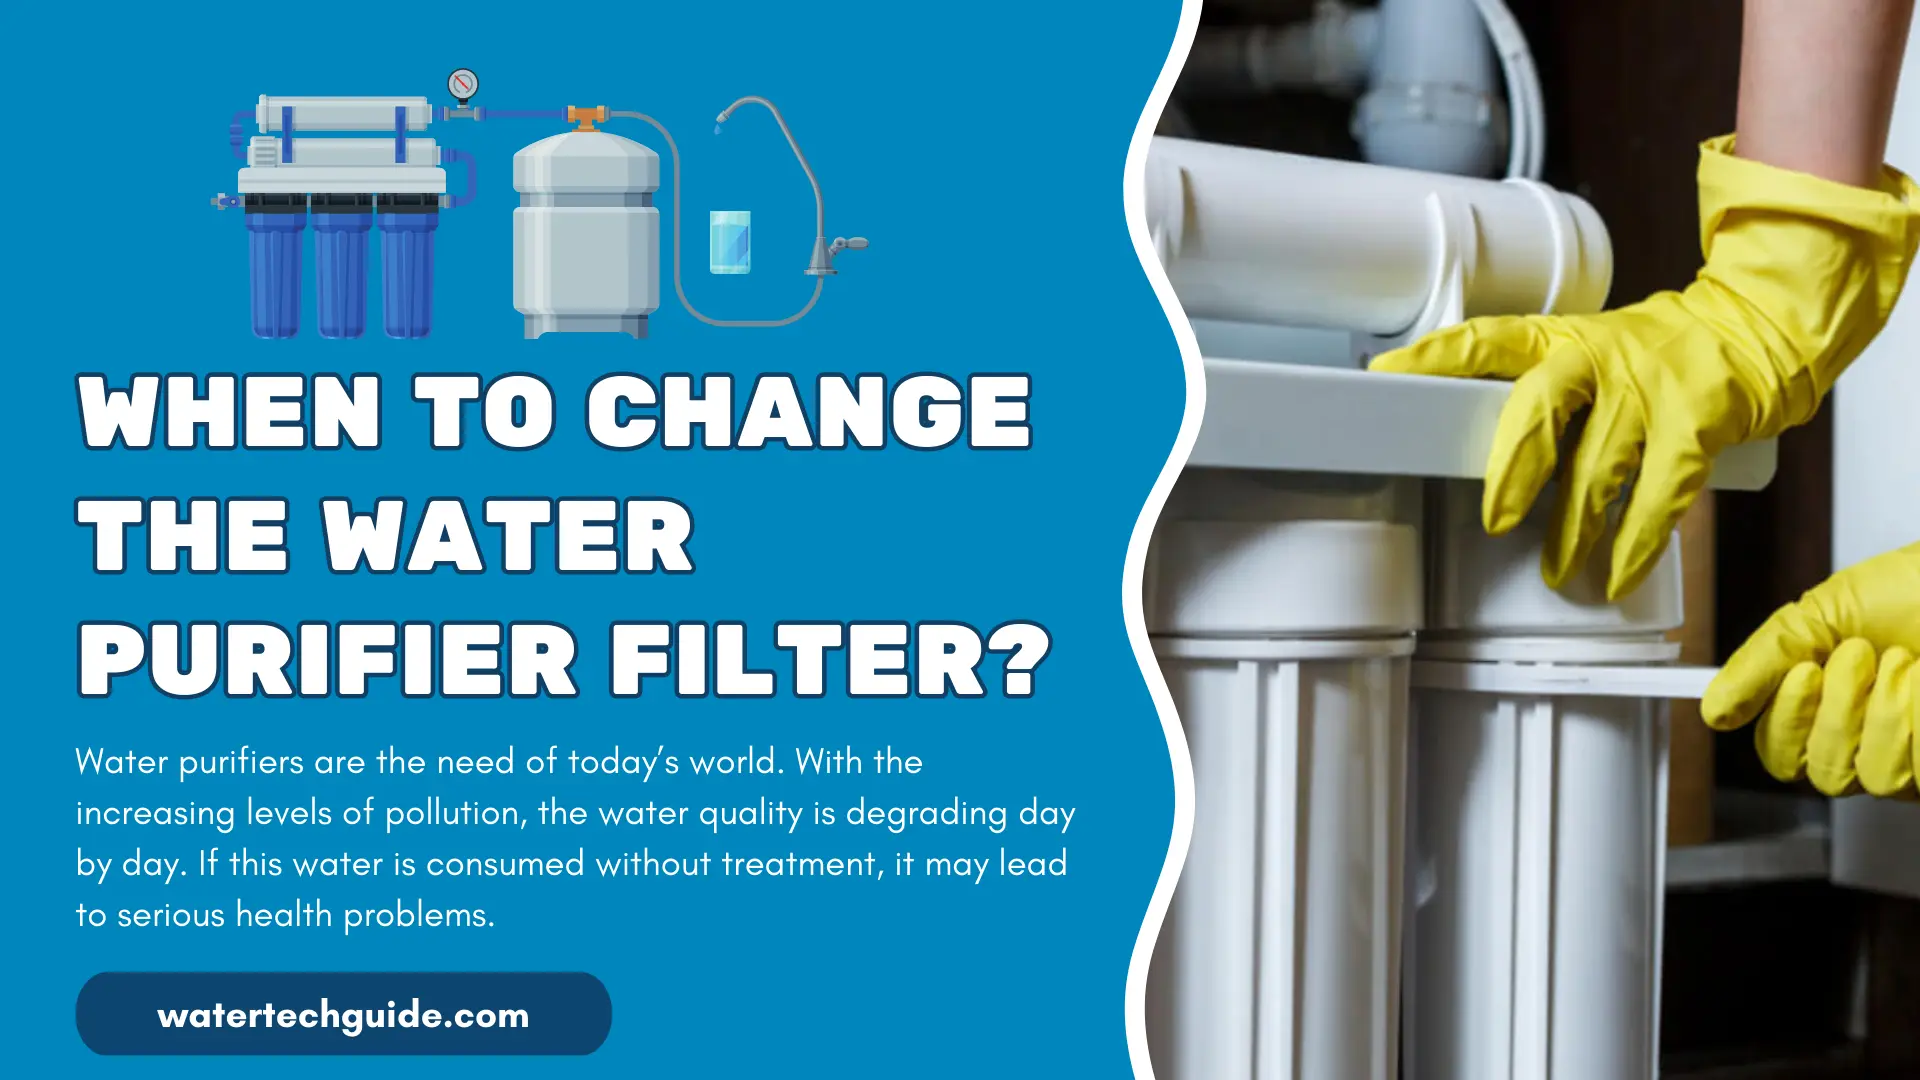 When to Change the Water Purifier Filter